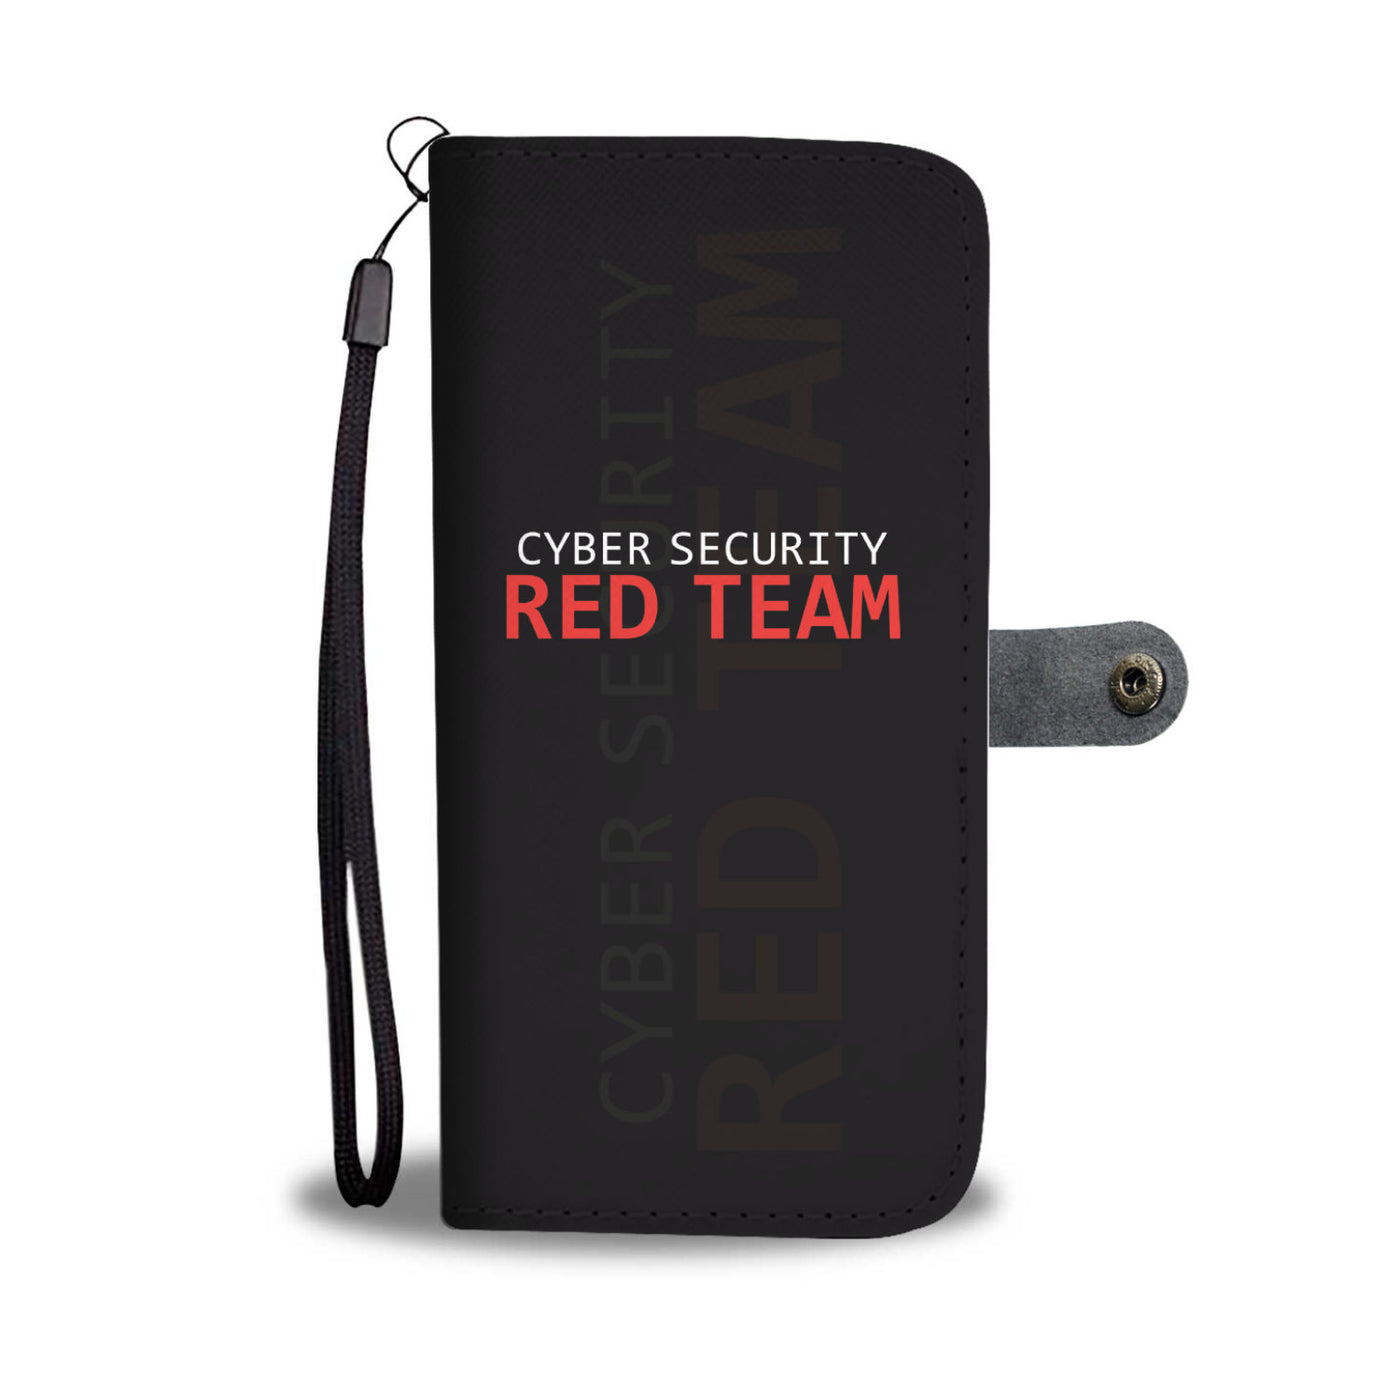 Cyber security Red Team Wallet Case